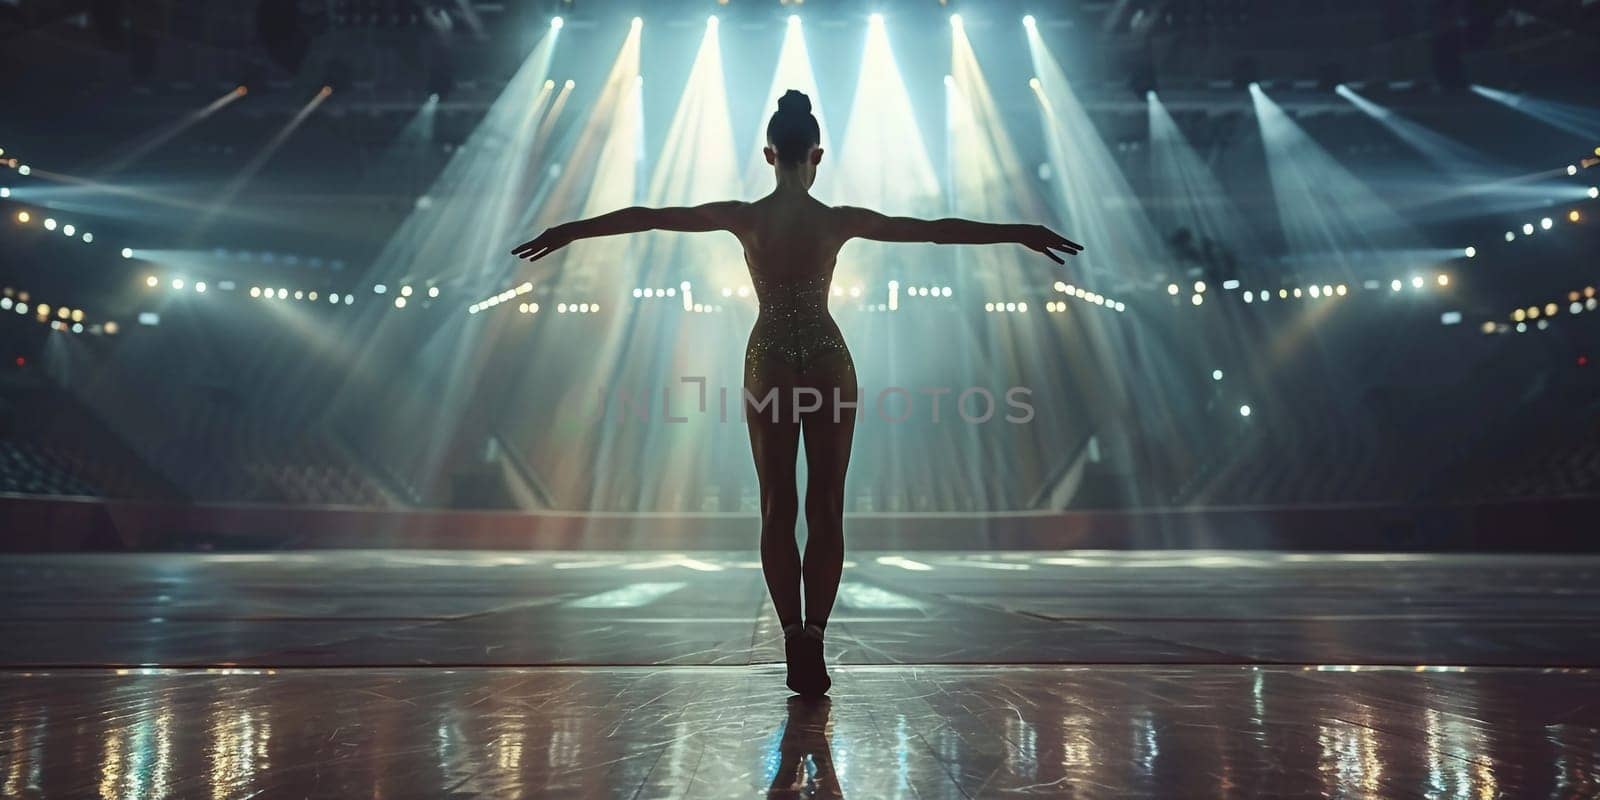 Theatrical performance. Beautiful, tender, graceful ballerina dancing against dark blue background with spotlight. Concept of art, classical ballet, creativity, choreography, beauty, ad by Andelov13